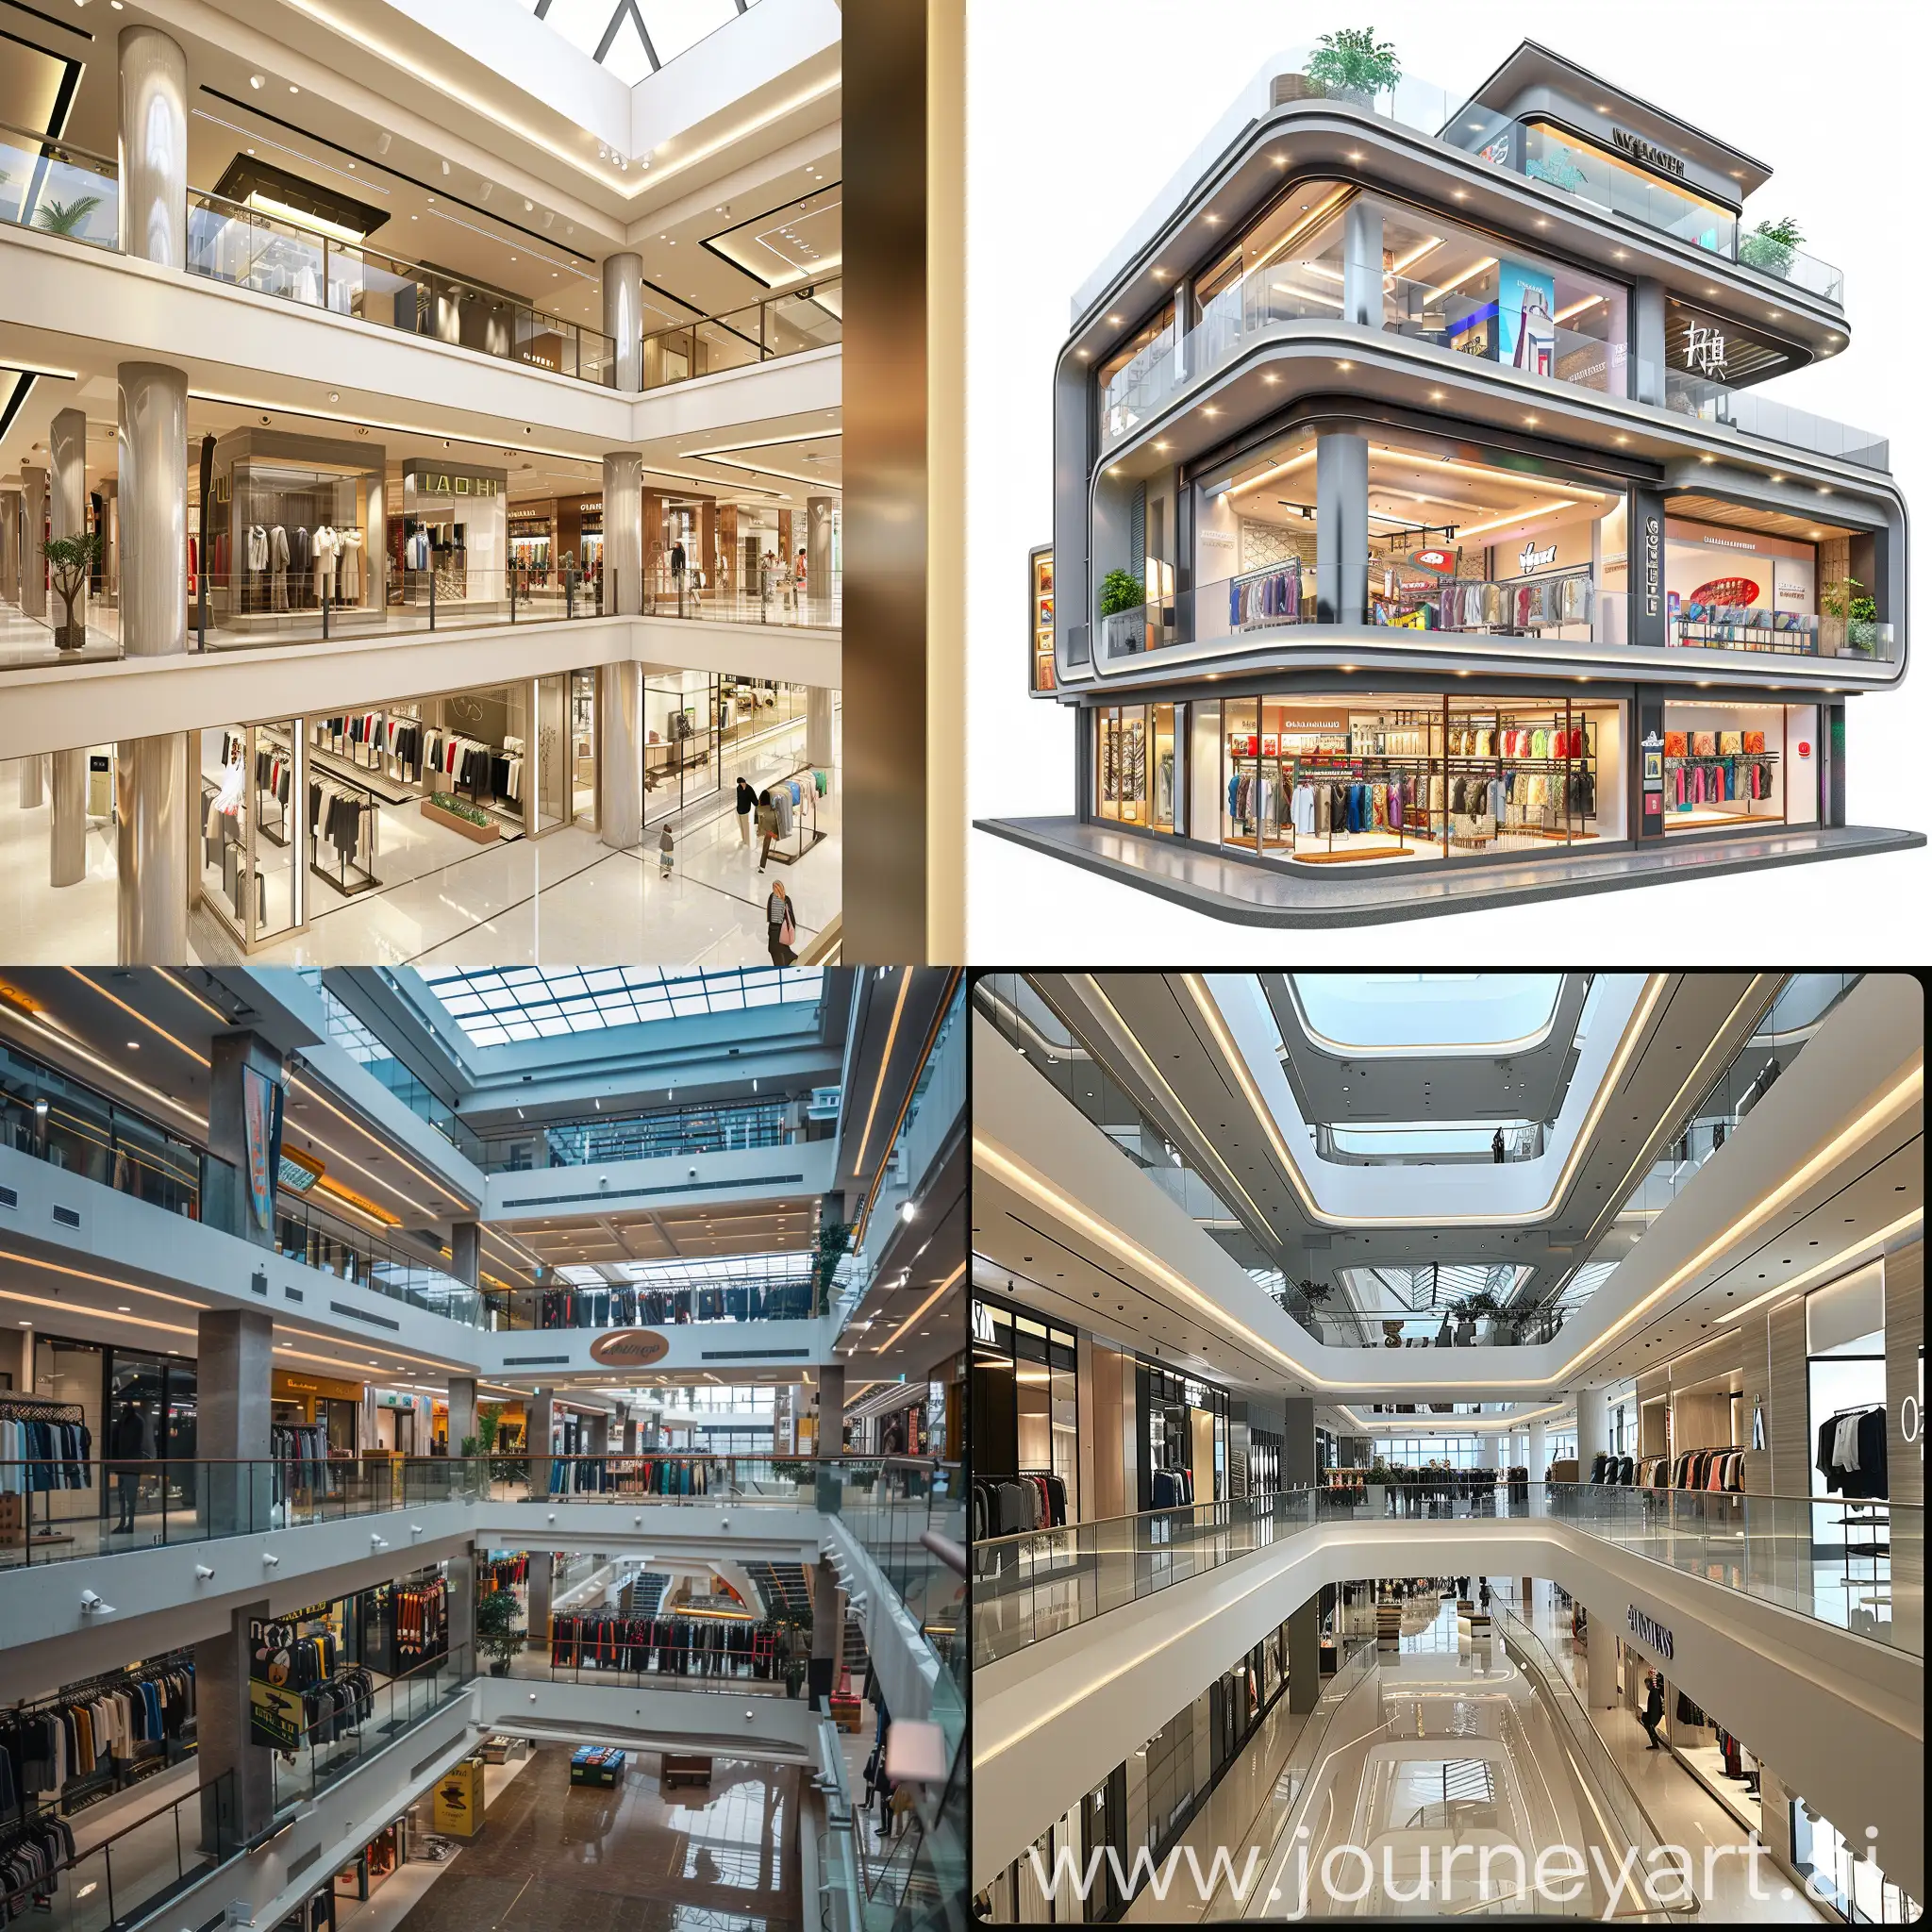 A clothing shoping mall 4 floor building
